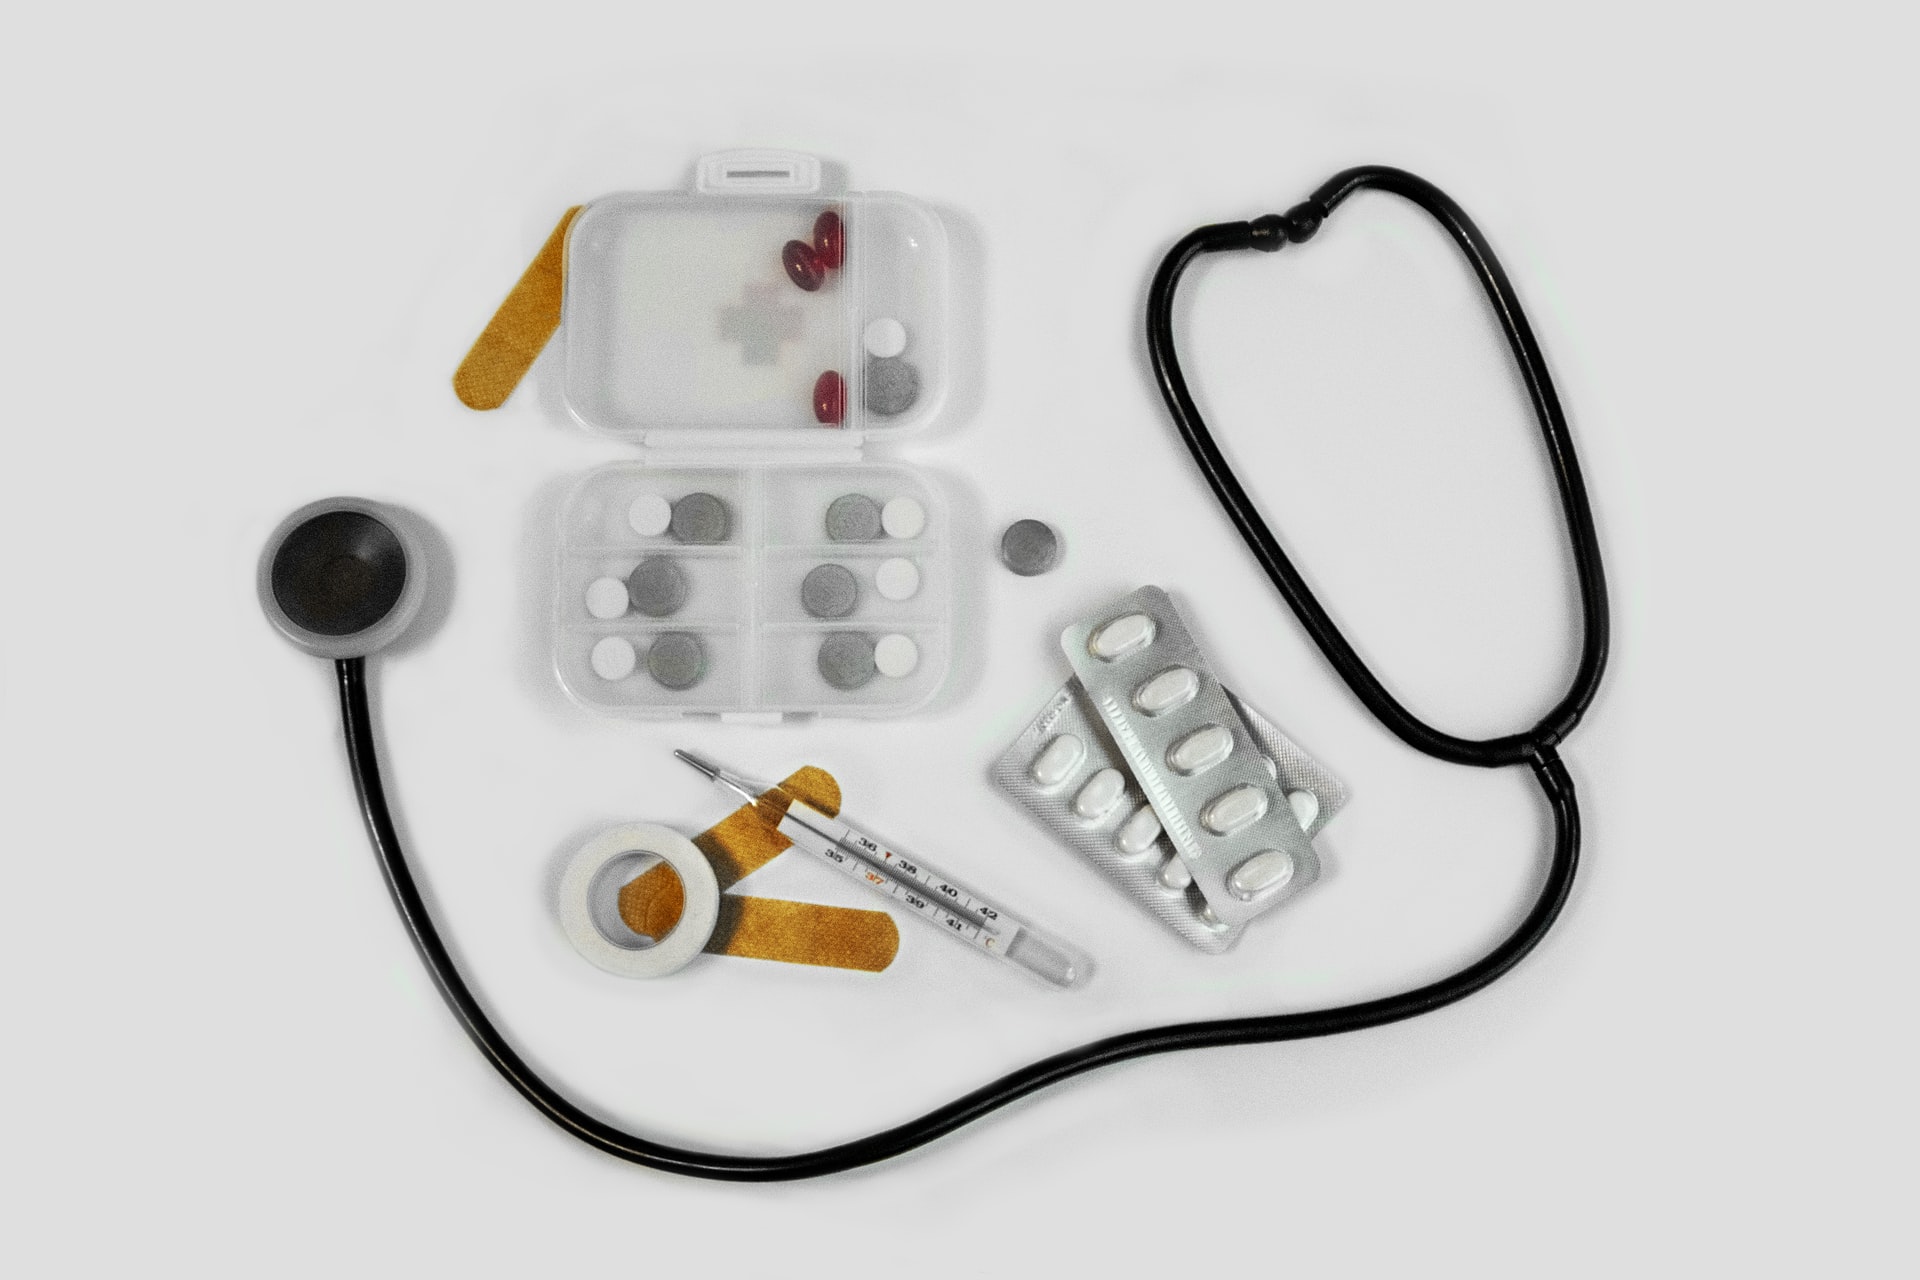 thermomenter, patches, tablets and stethoscope